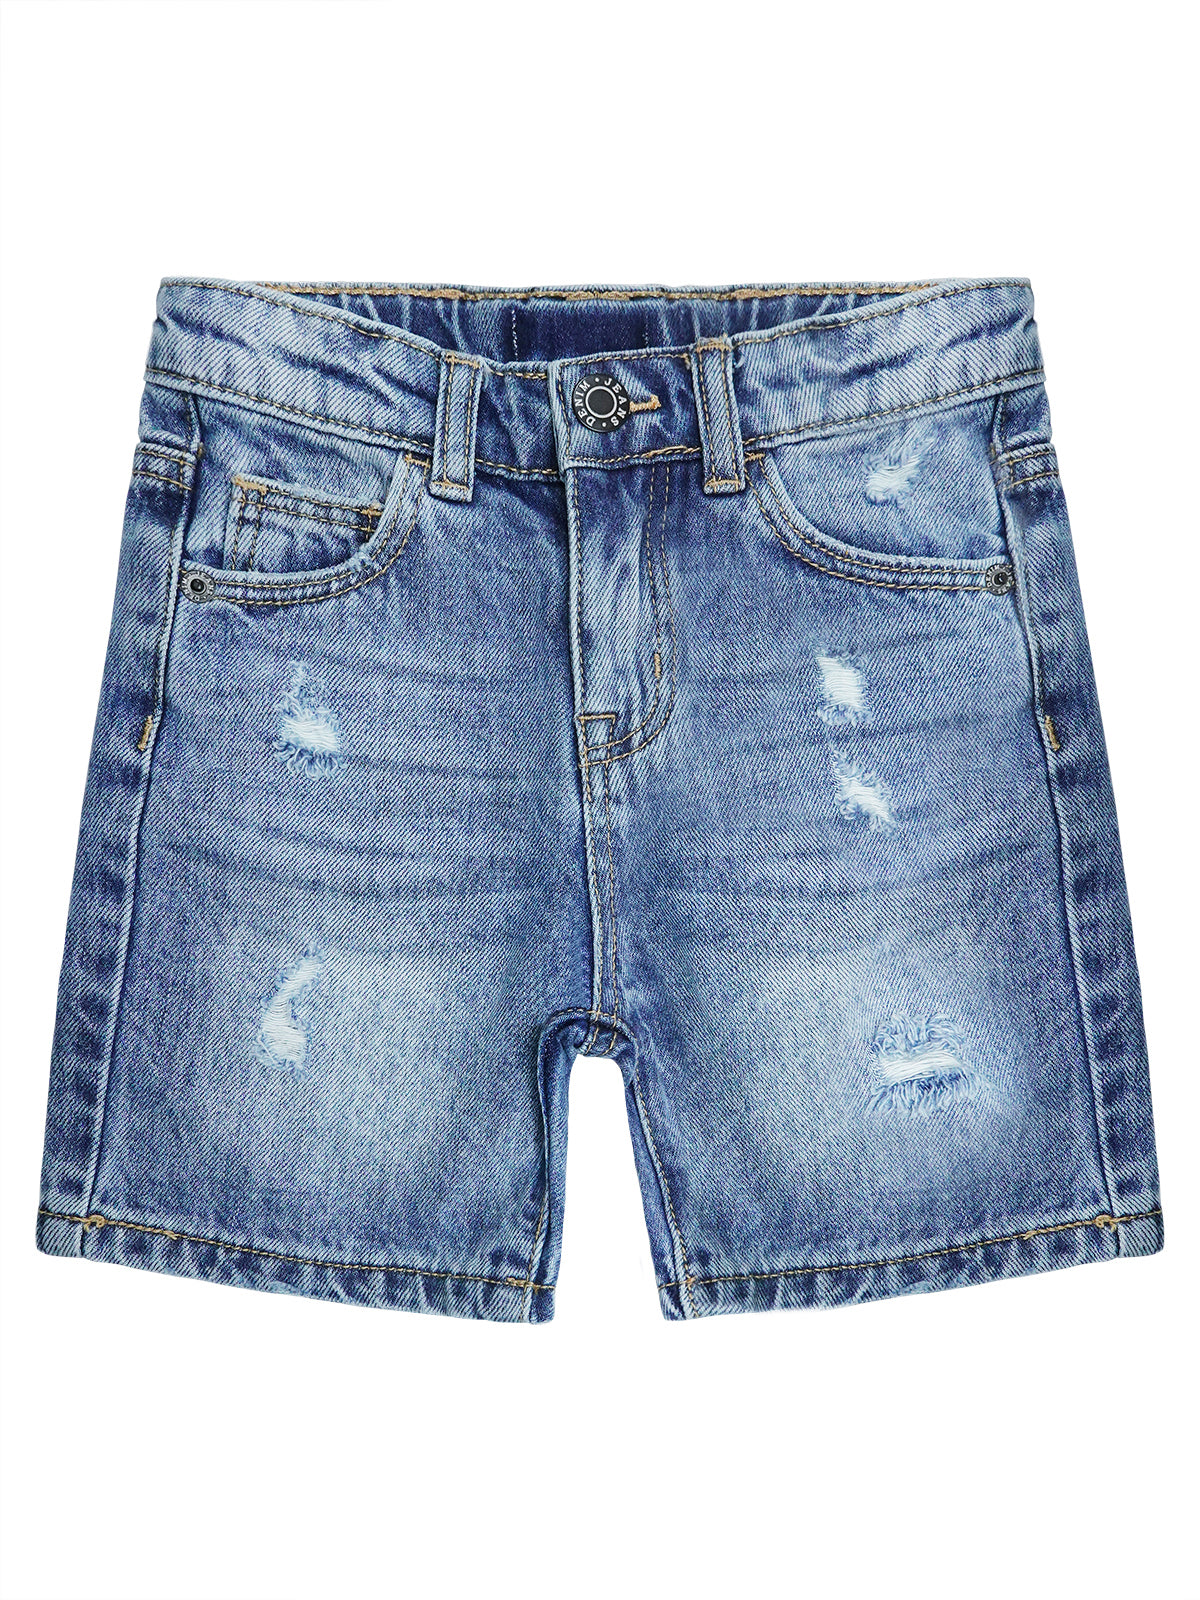 Baby Little Girls Boys Jeans Shorts,Ripped Stretchy Simple Design Cute Summer Denim Pants